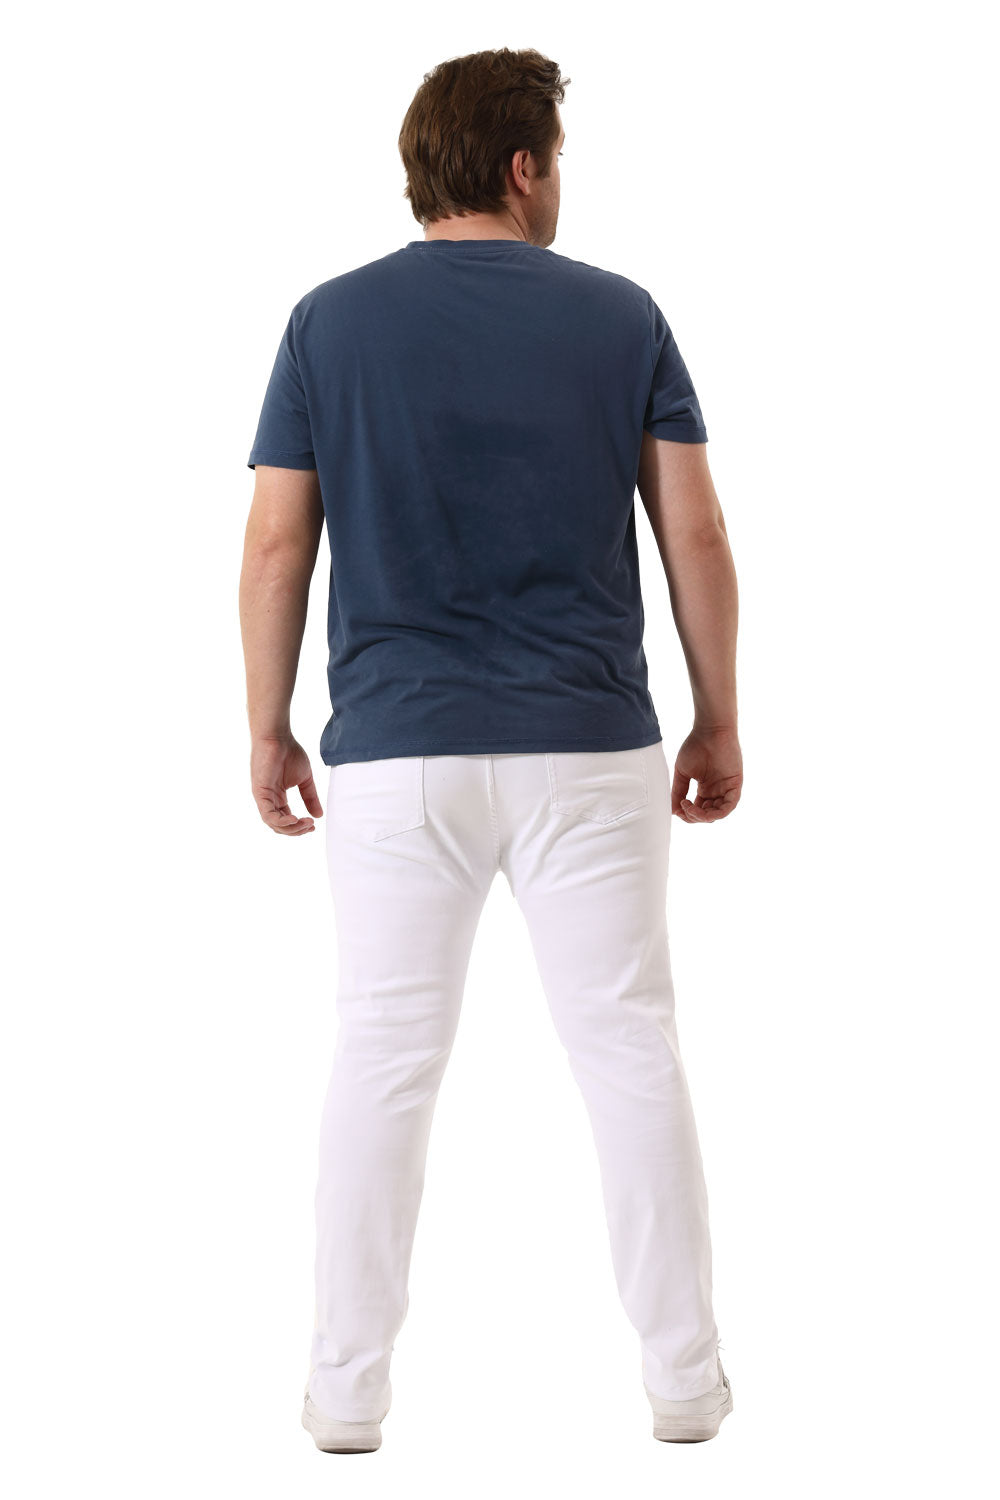 Mens White Jeans Ripped Stretch Jeans(B&T)